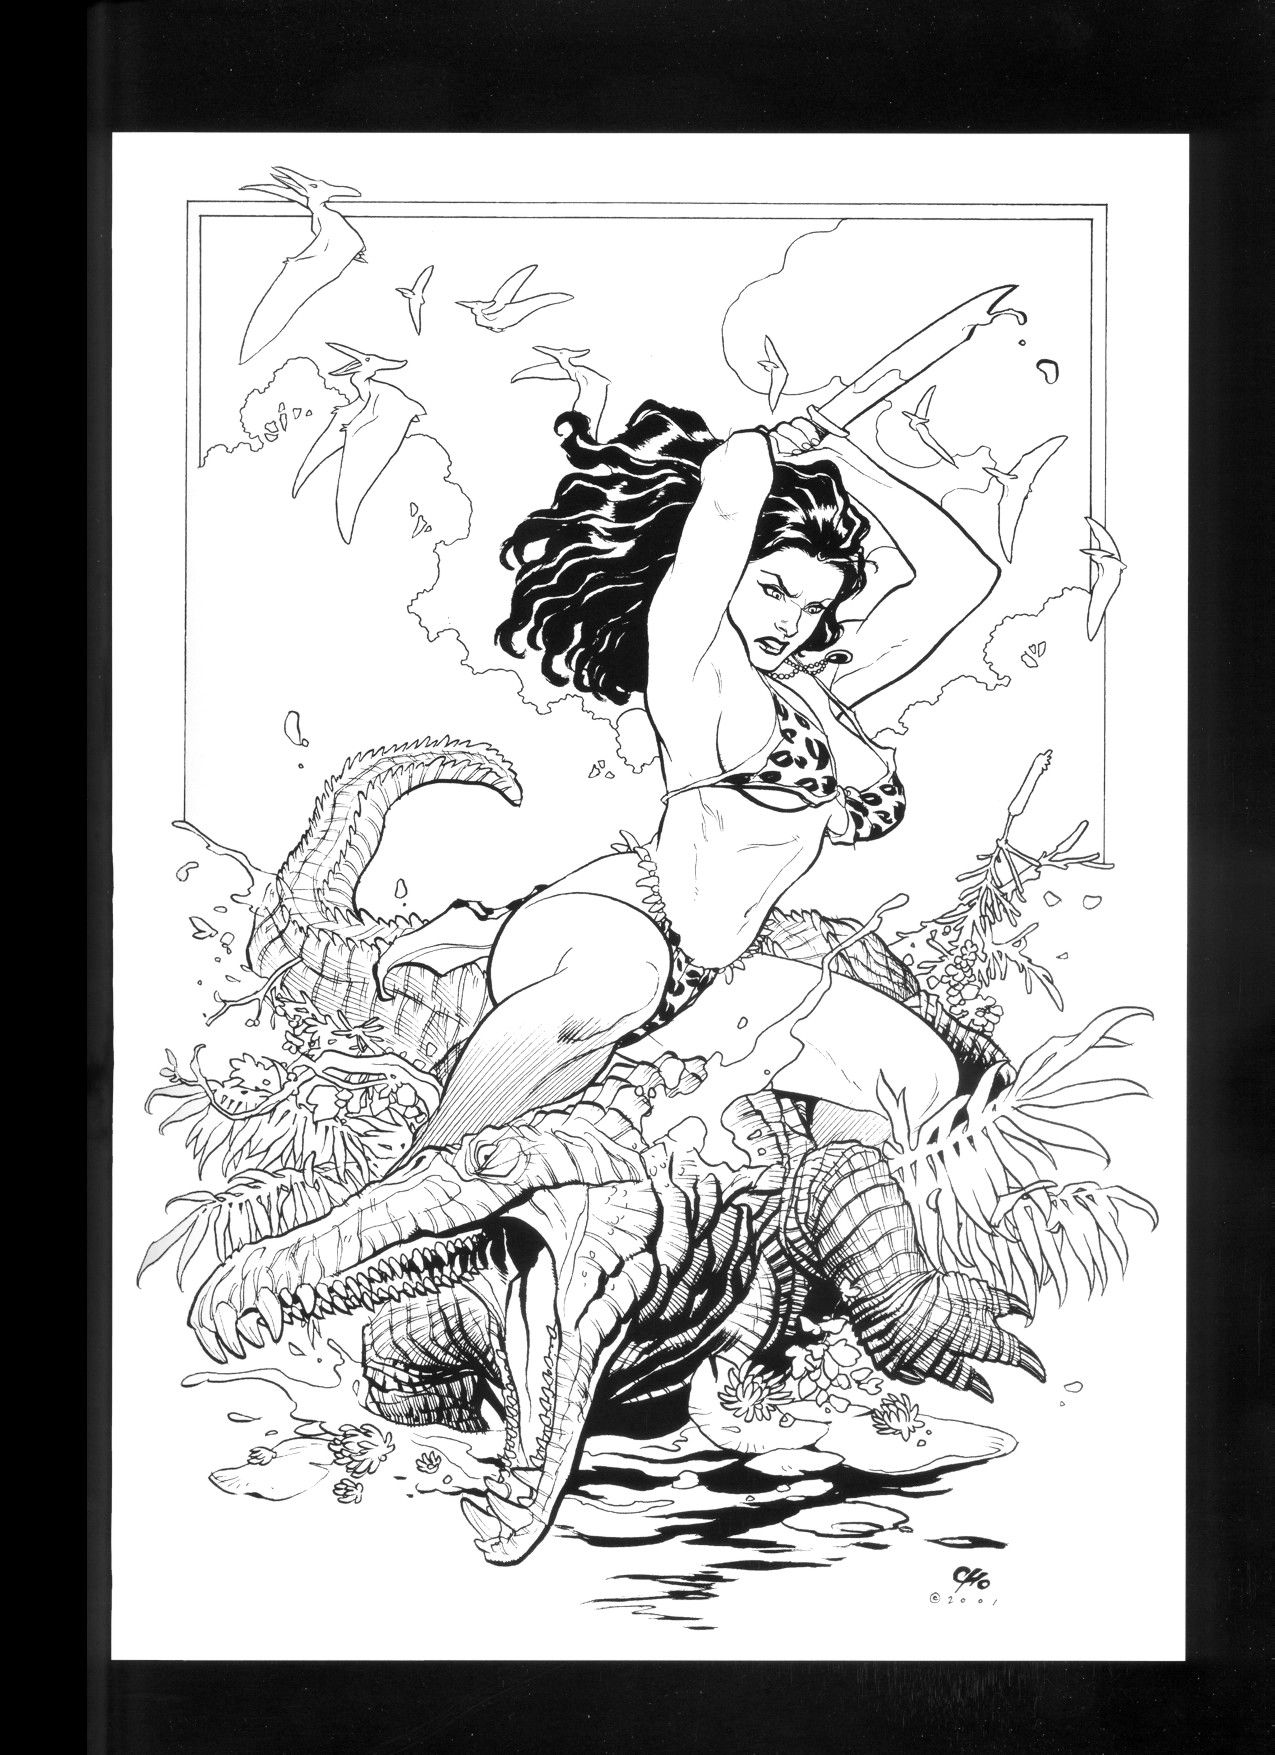 [Frank Cho] Women - Selected Drawings and Illustrations 54